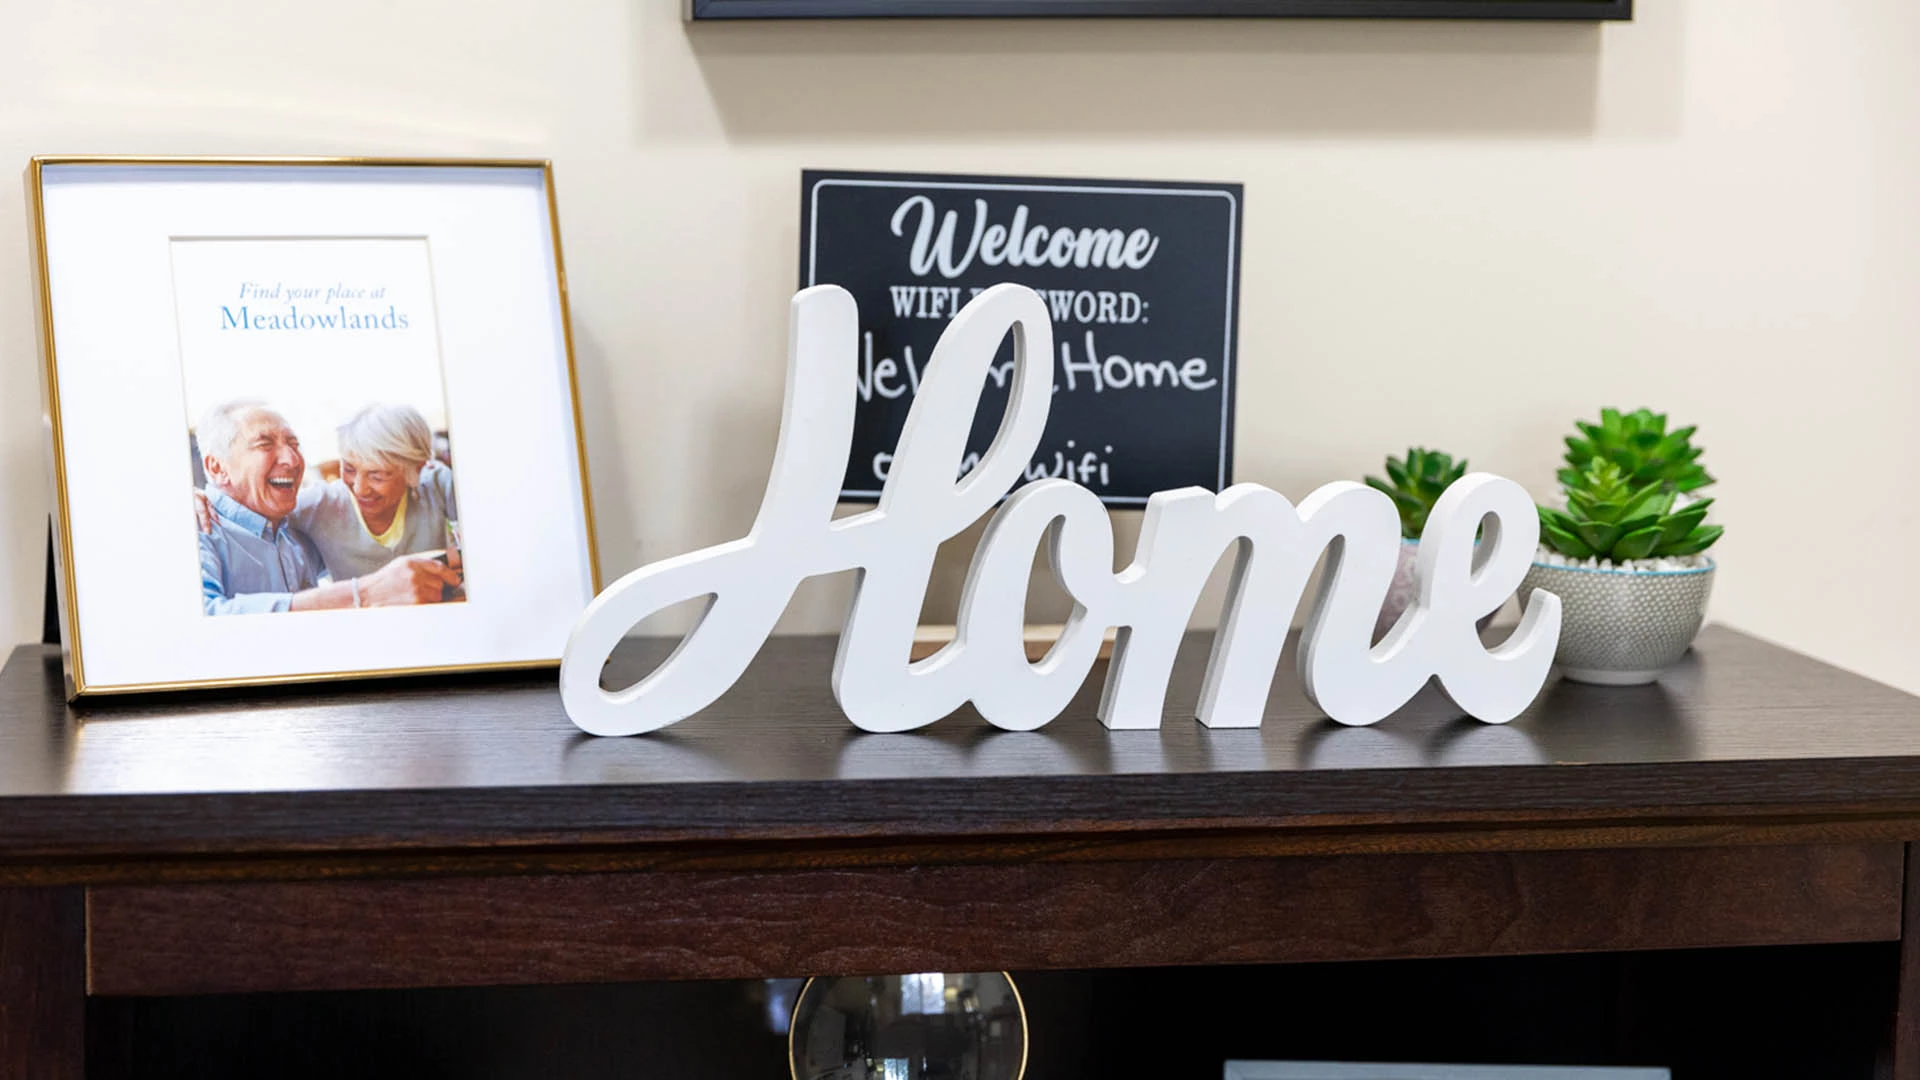 Table with a Home sign and pictures